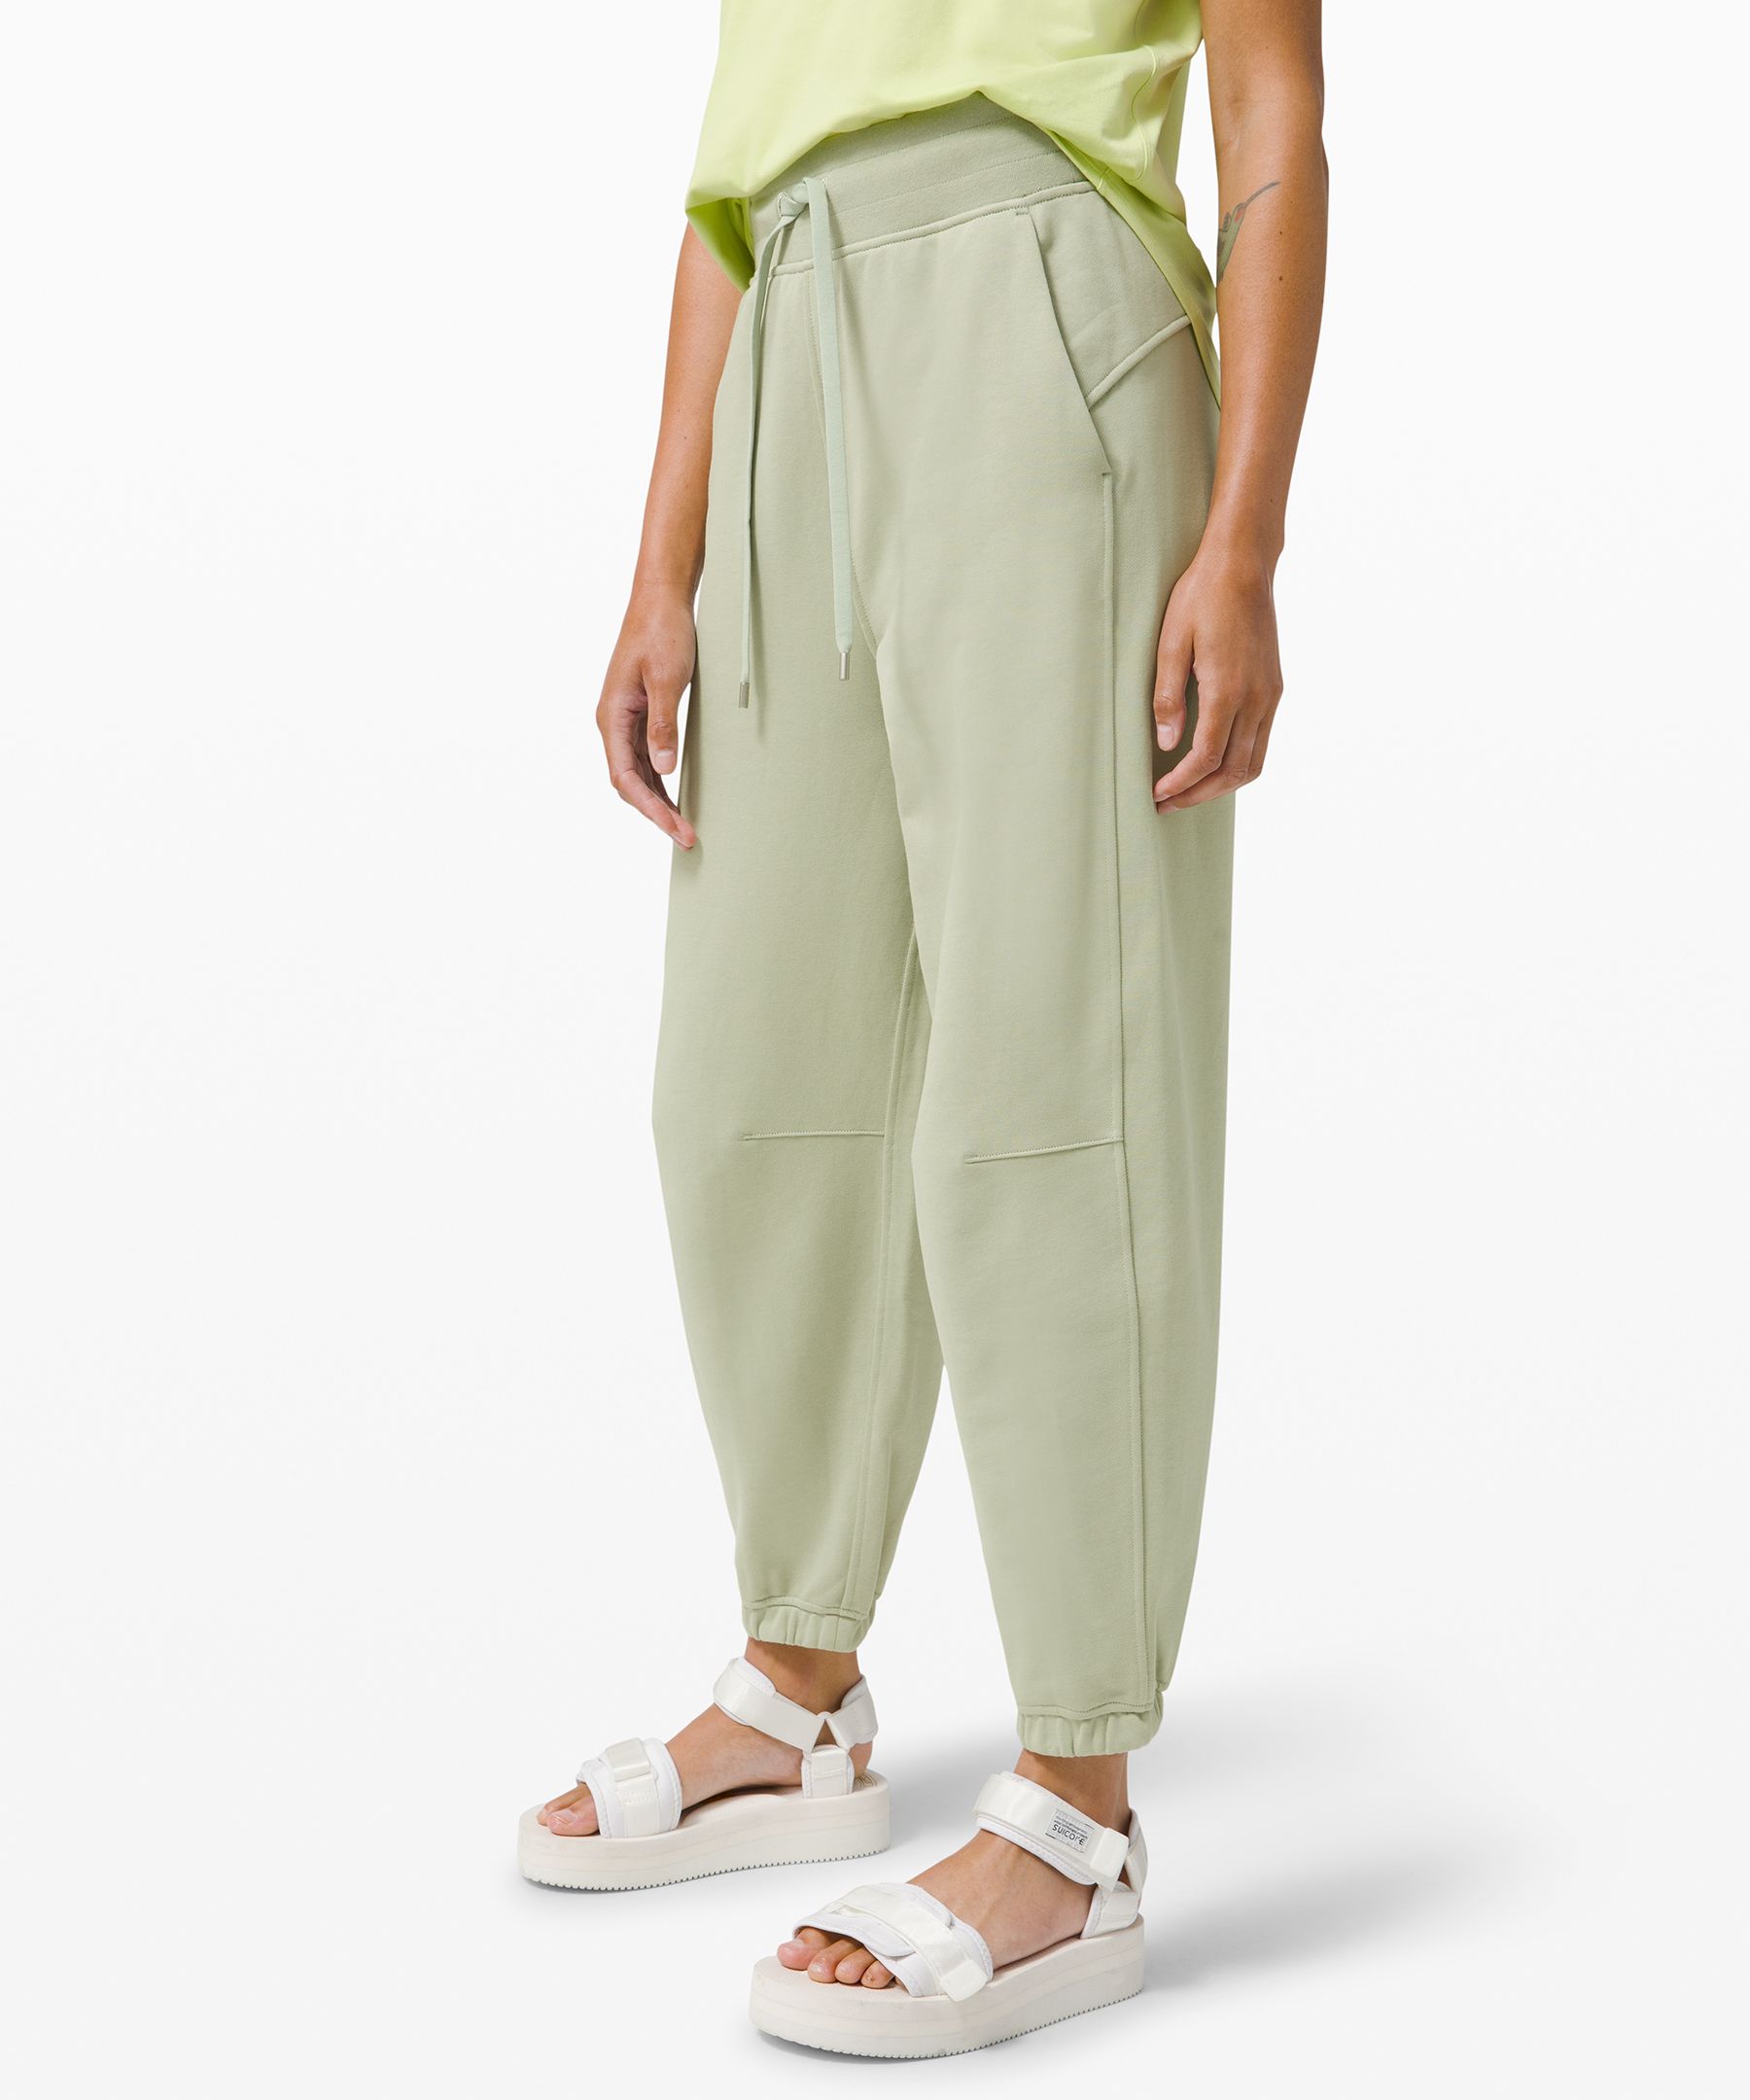 Cozy Joggers - Green - Rise